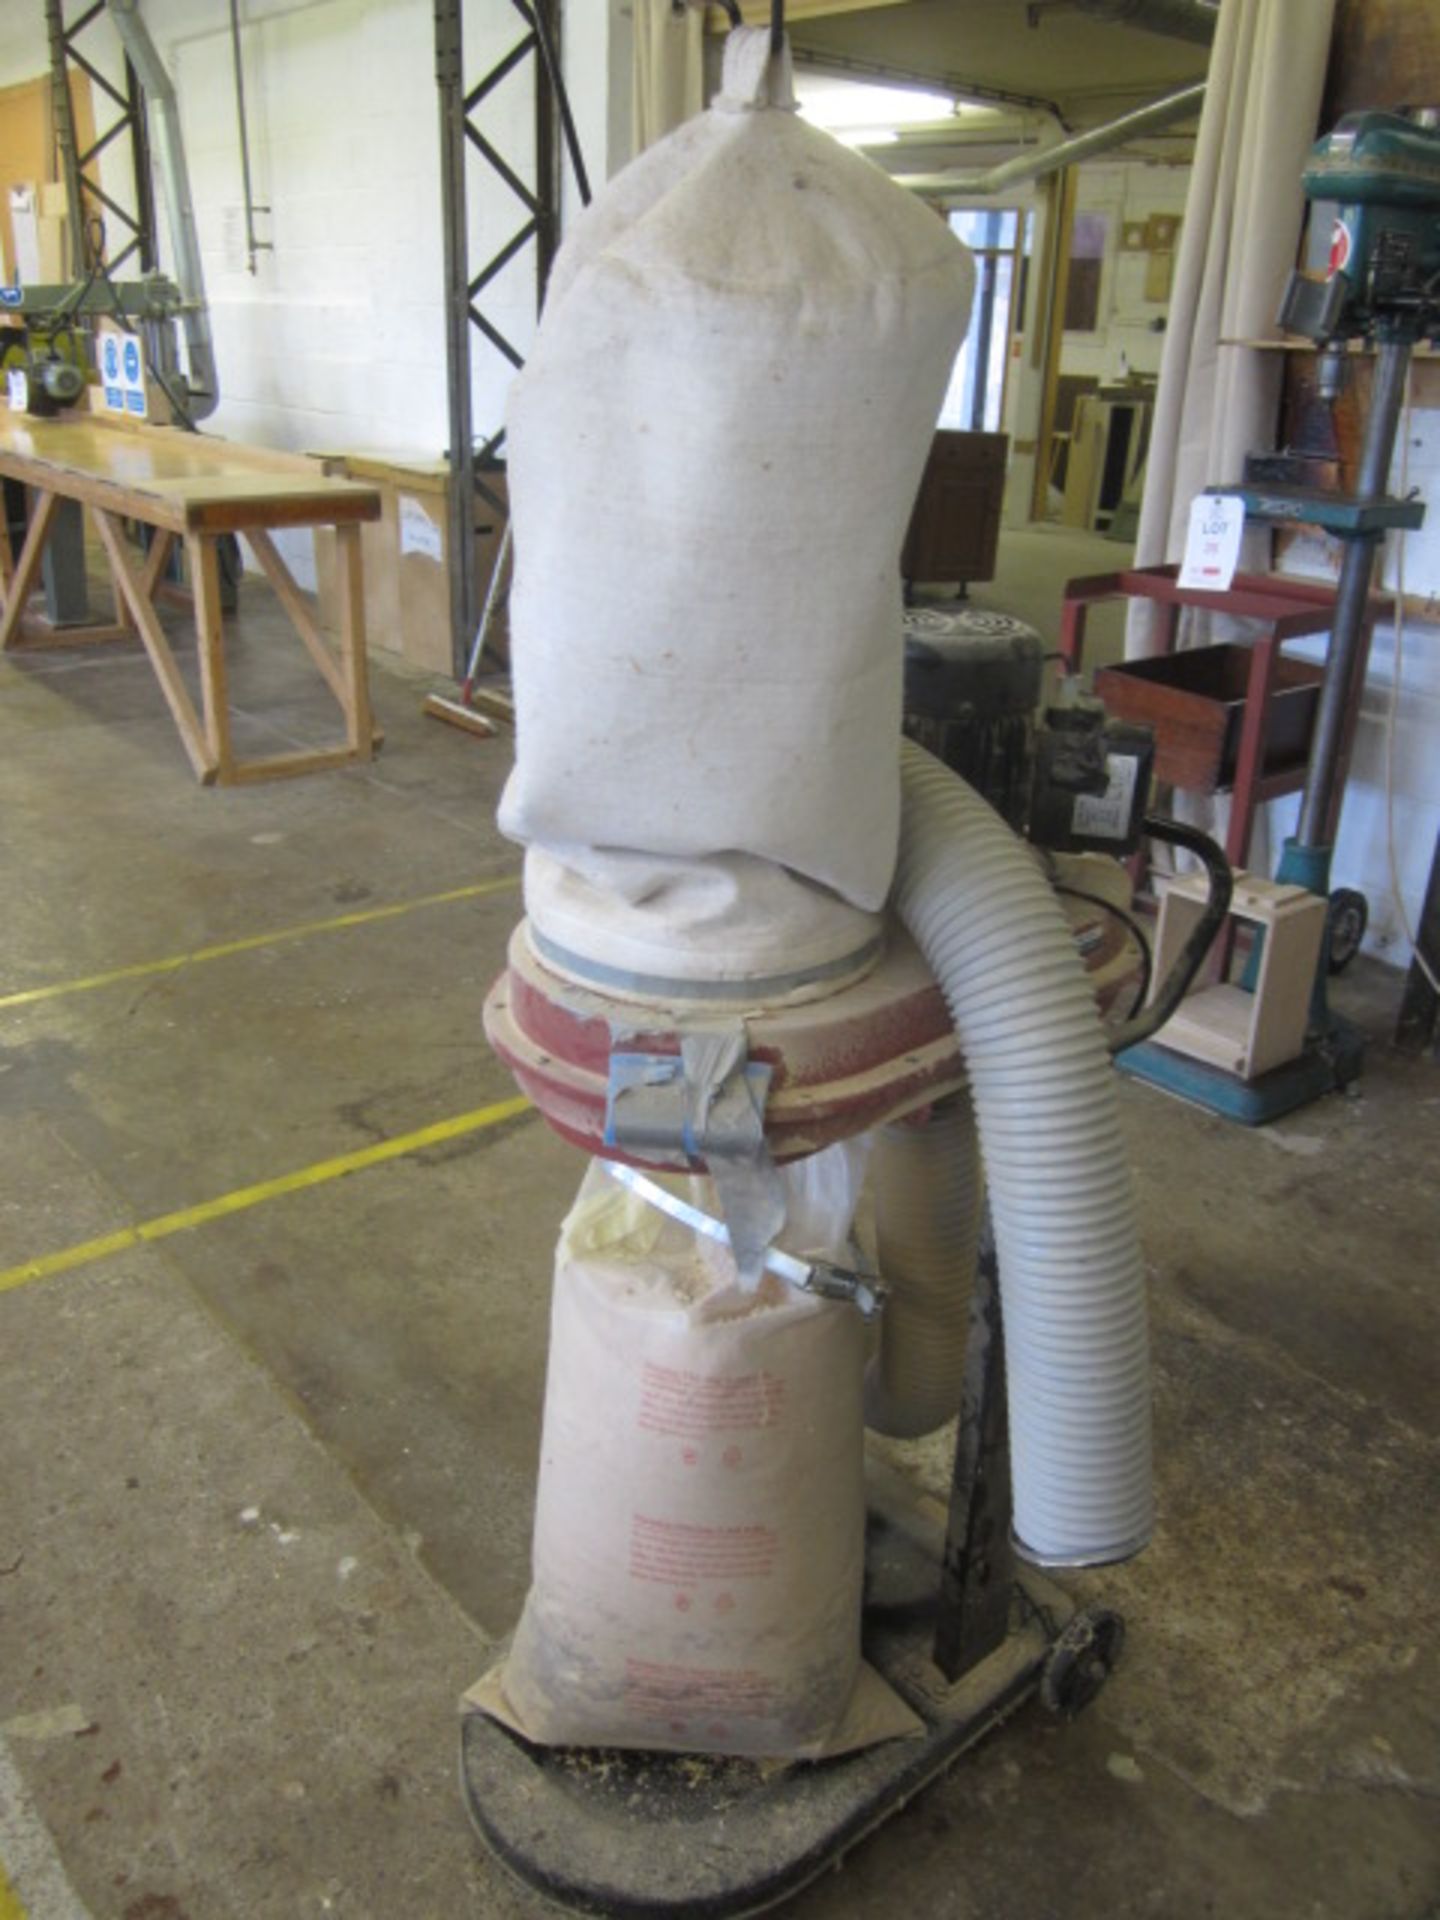 Rexon mobile single bag dust extractor, model DE-1000F, serial number 14607 - Image 3 of 4